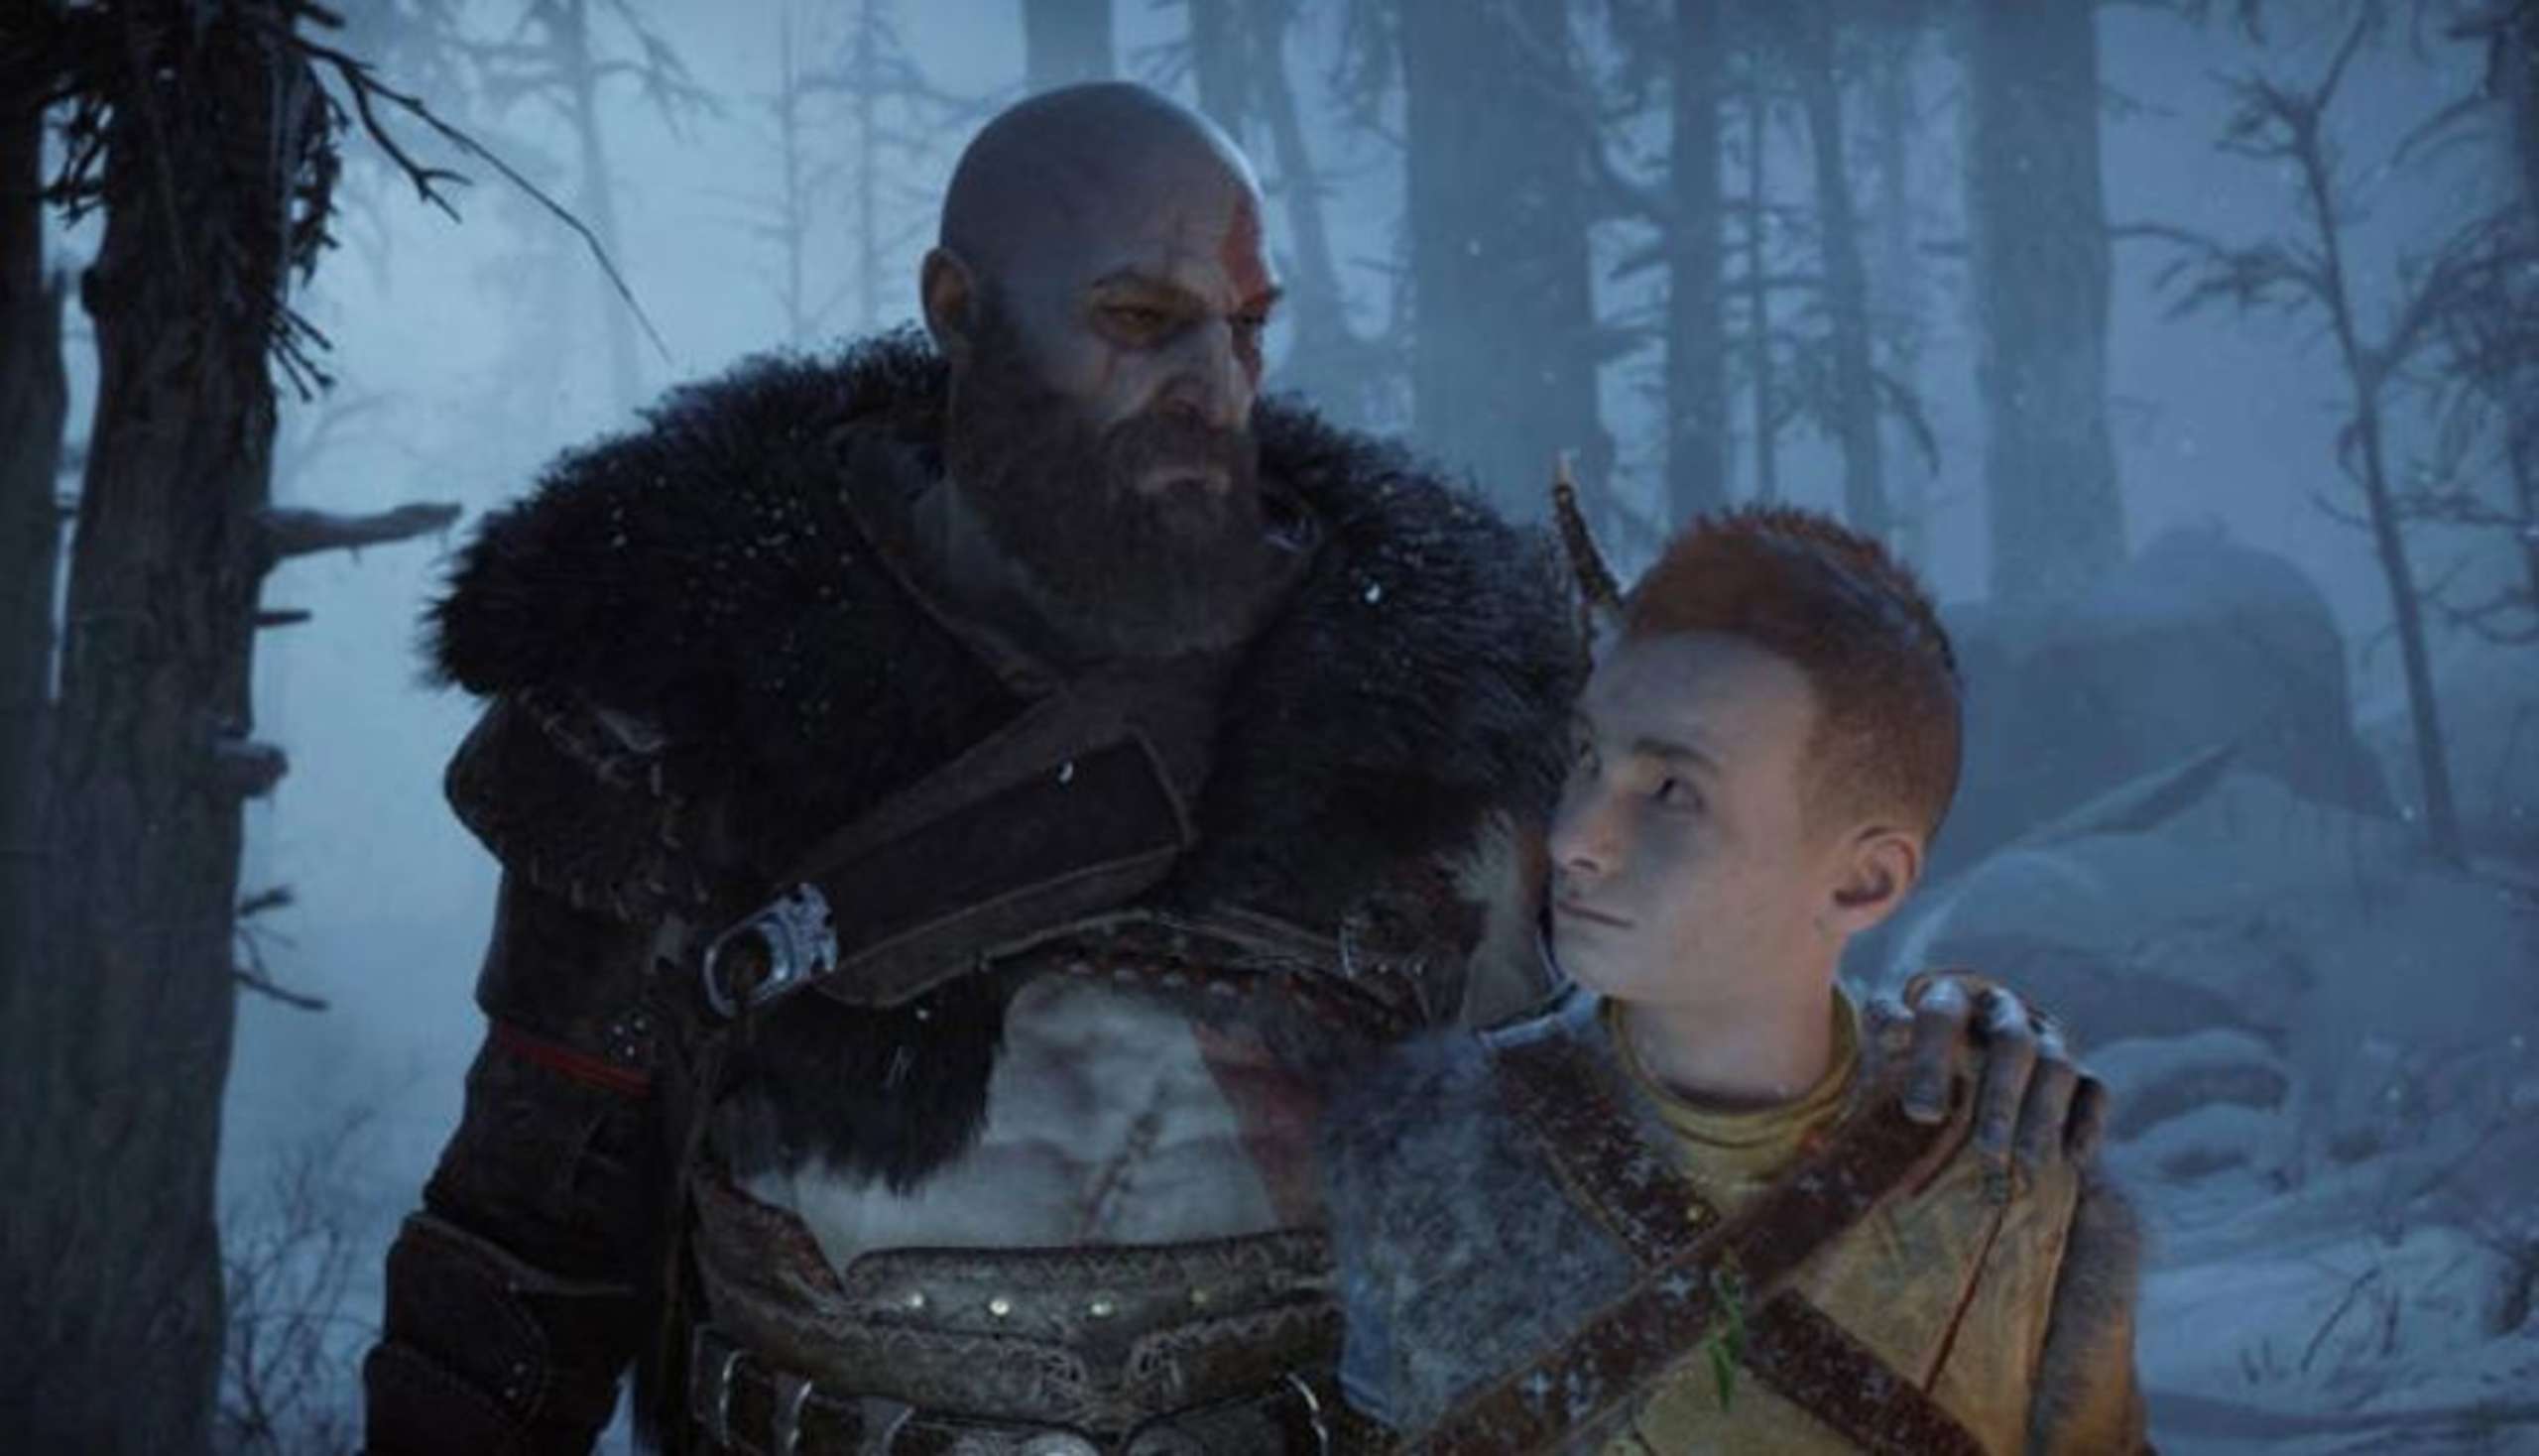 God of War Ragnarok, A Legendary Successor To The Upcoming Video Game, Has Had Plot And Gameplay Details Leaked Online Before Its Release Due To Images That Have Appeared Online